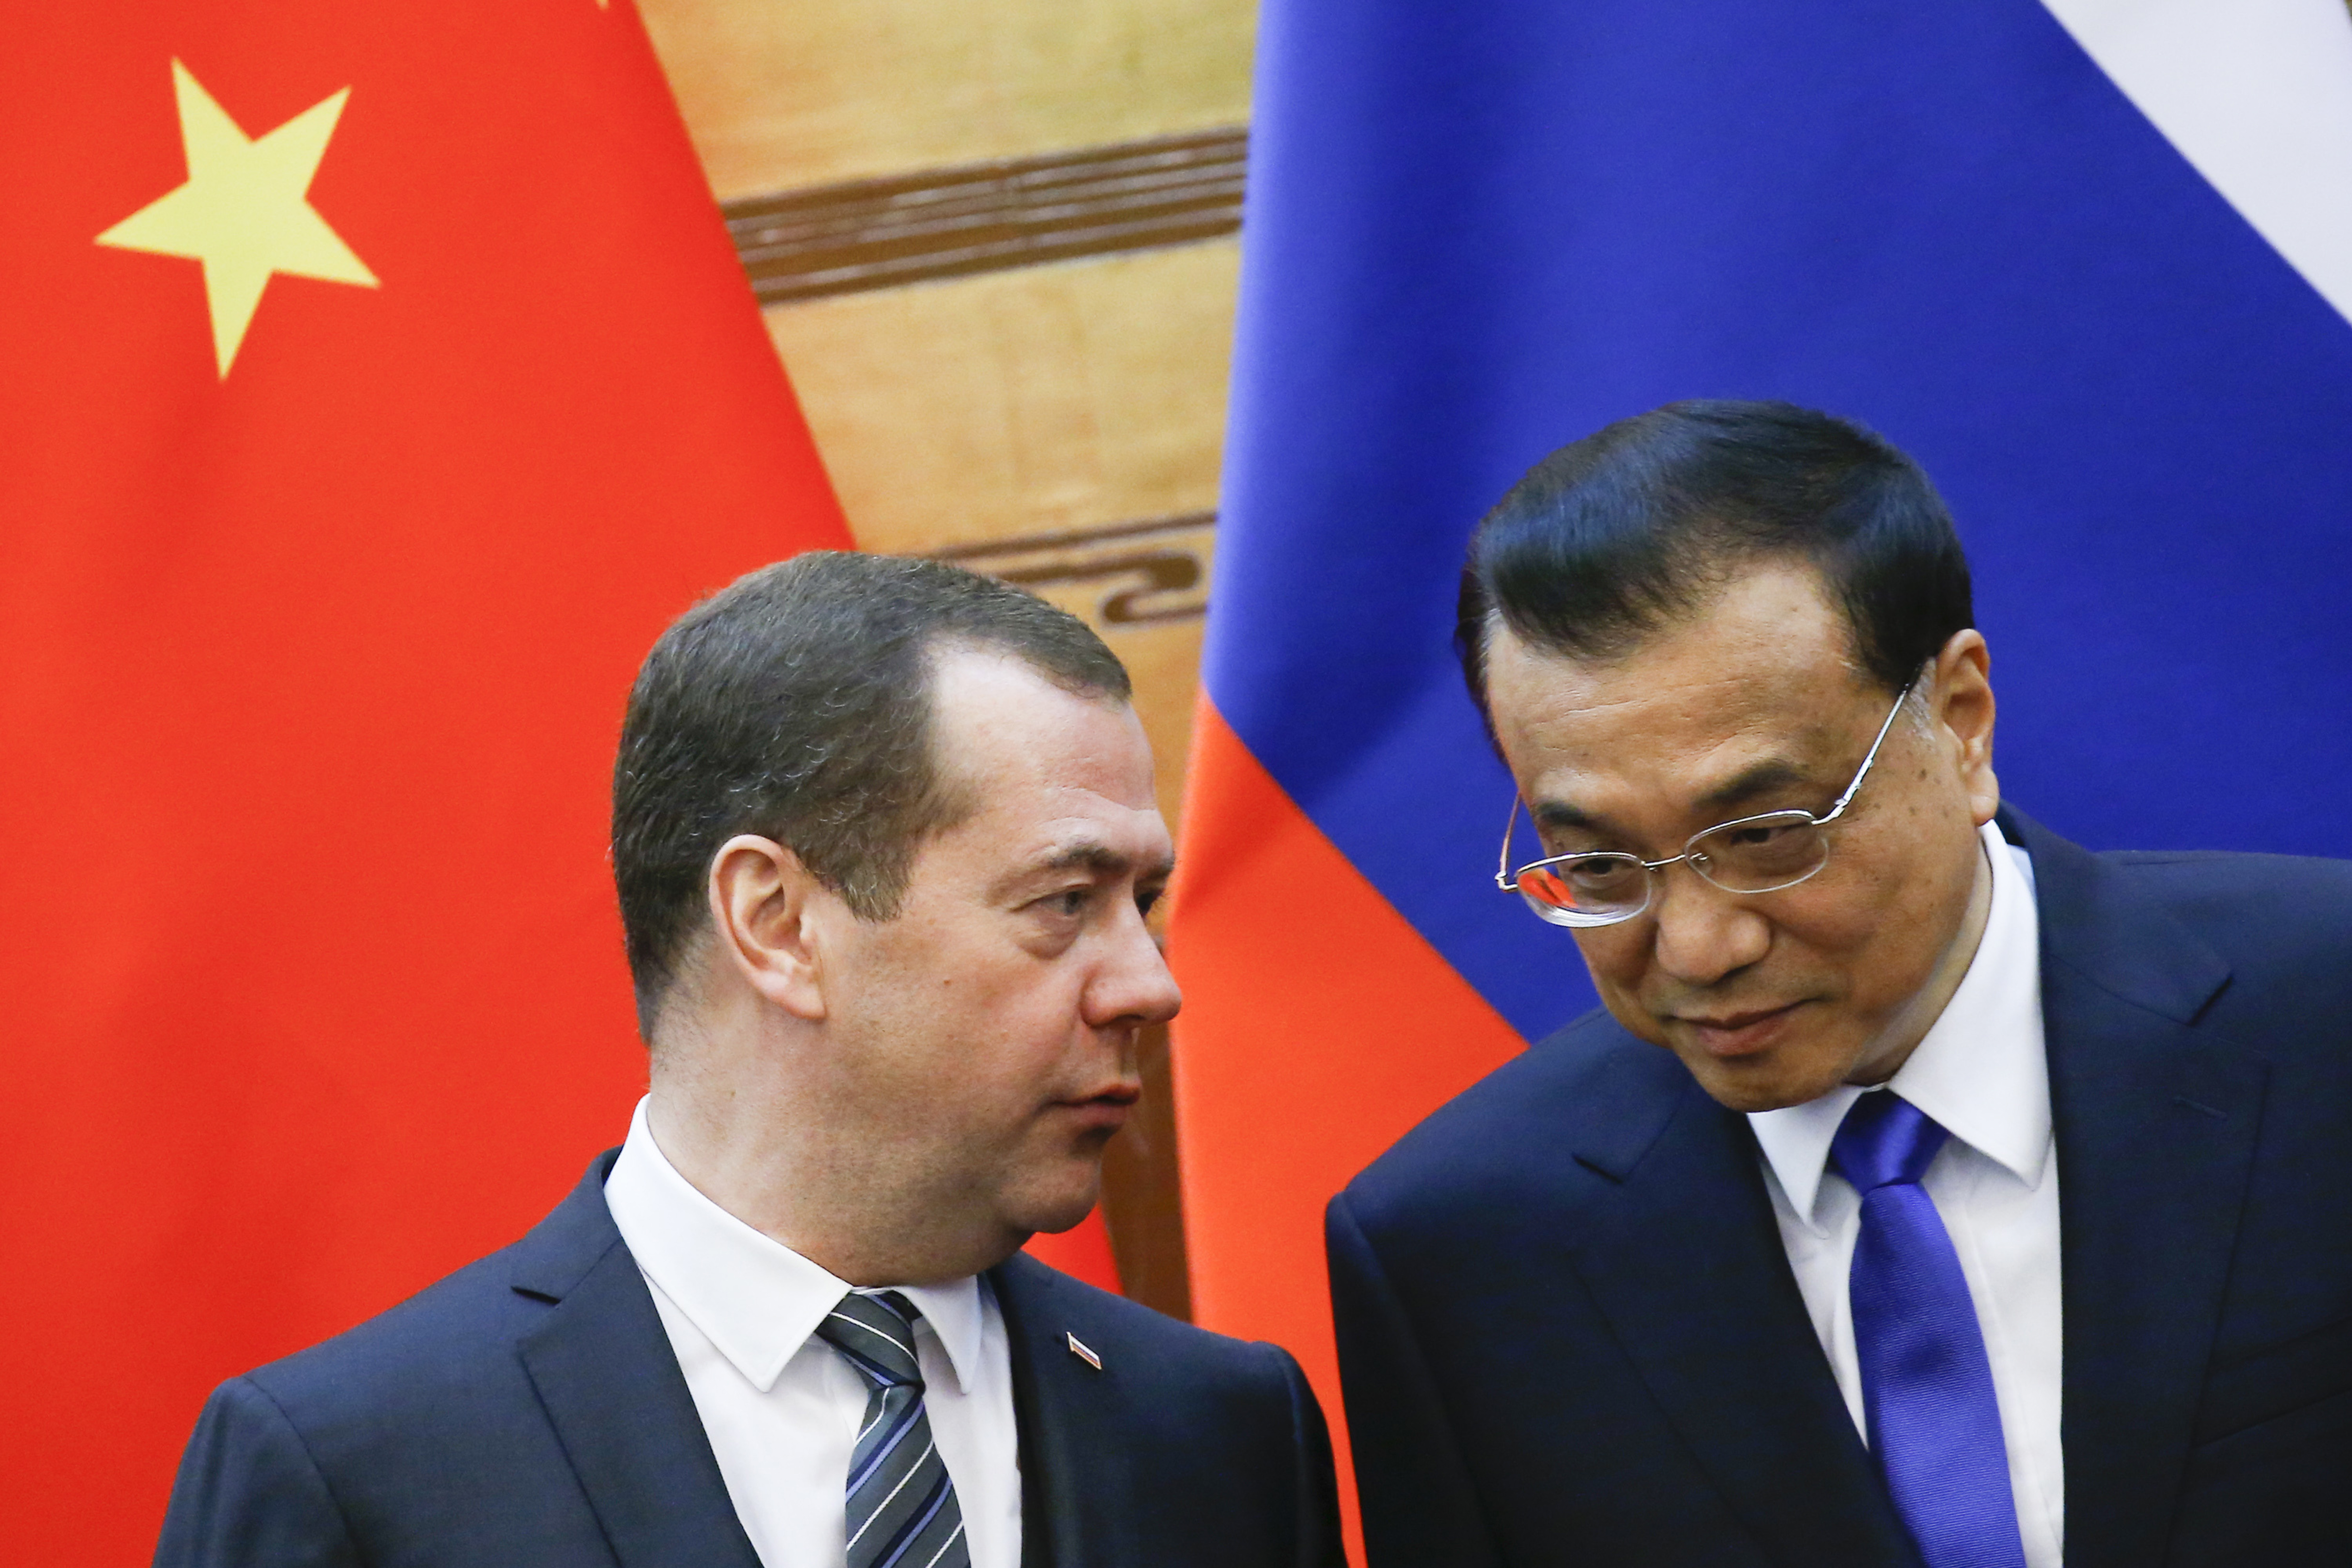 Chinese and Russian officials